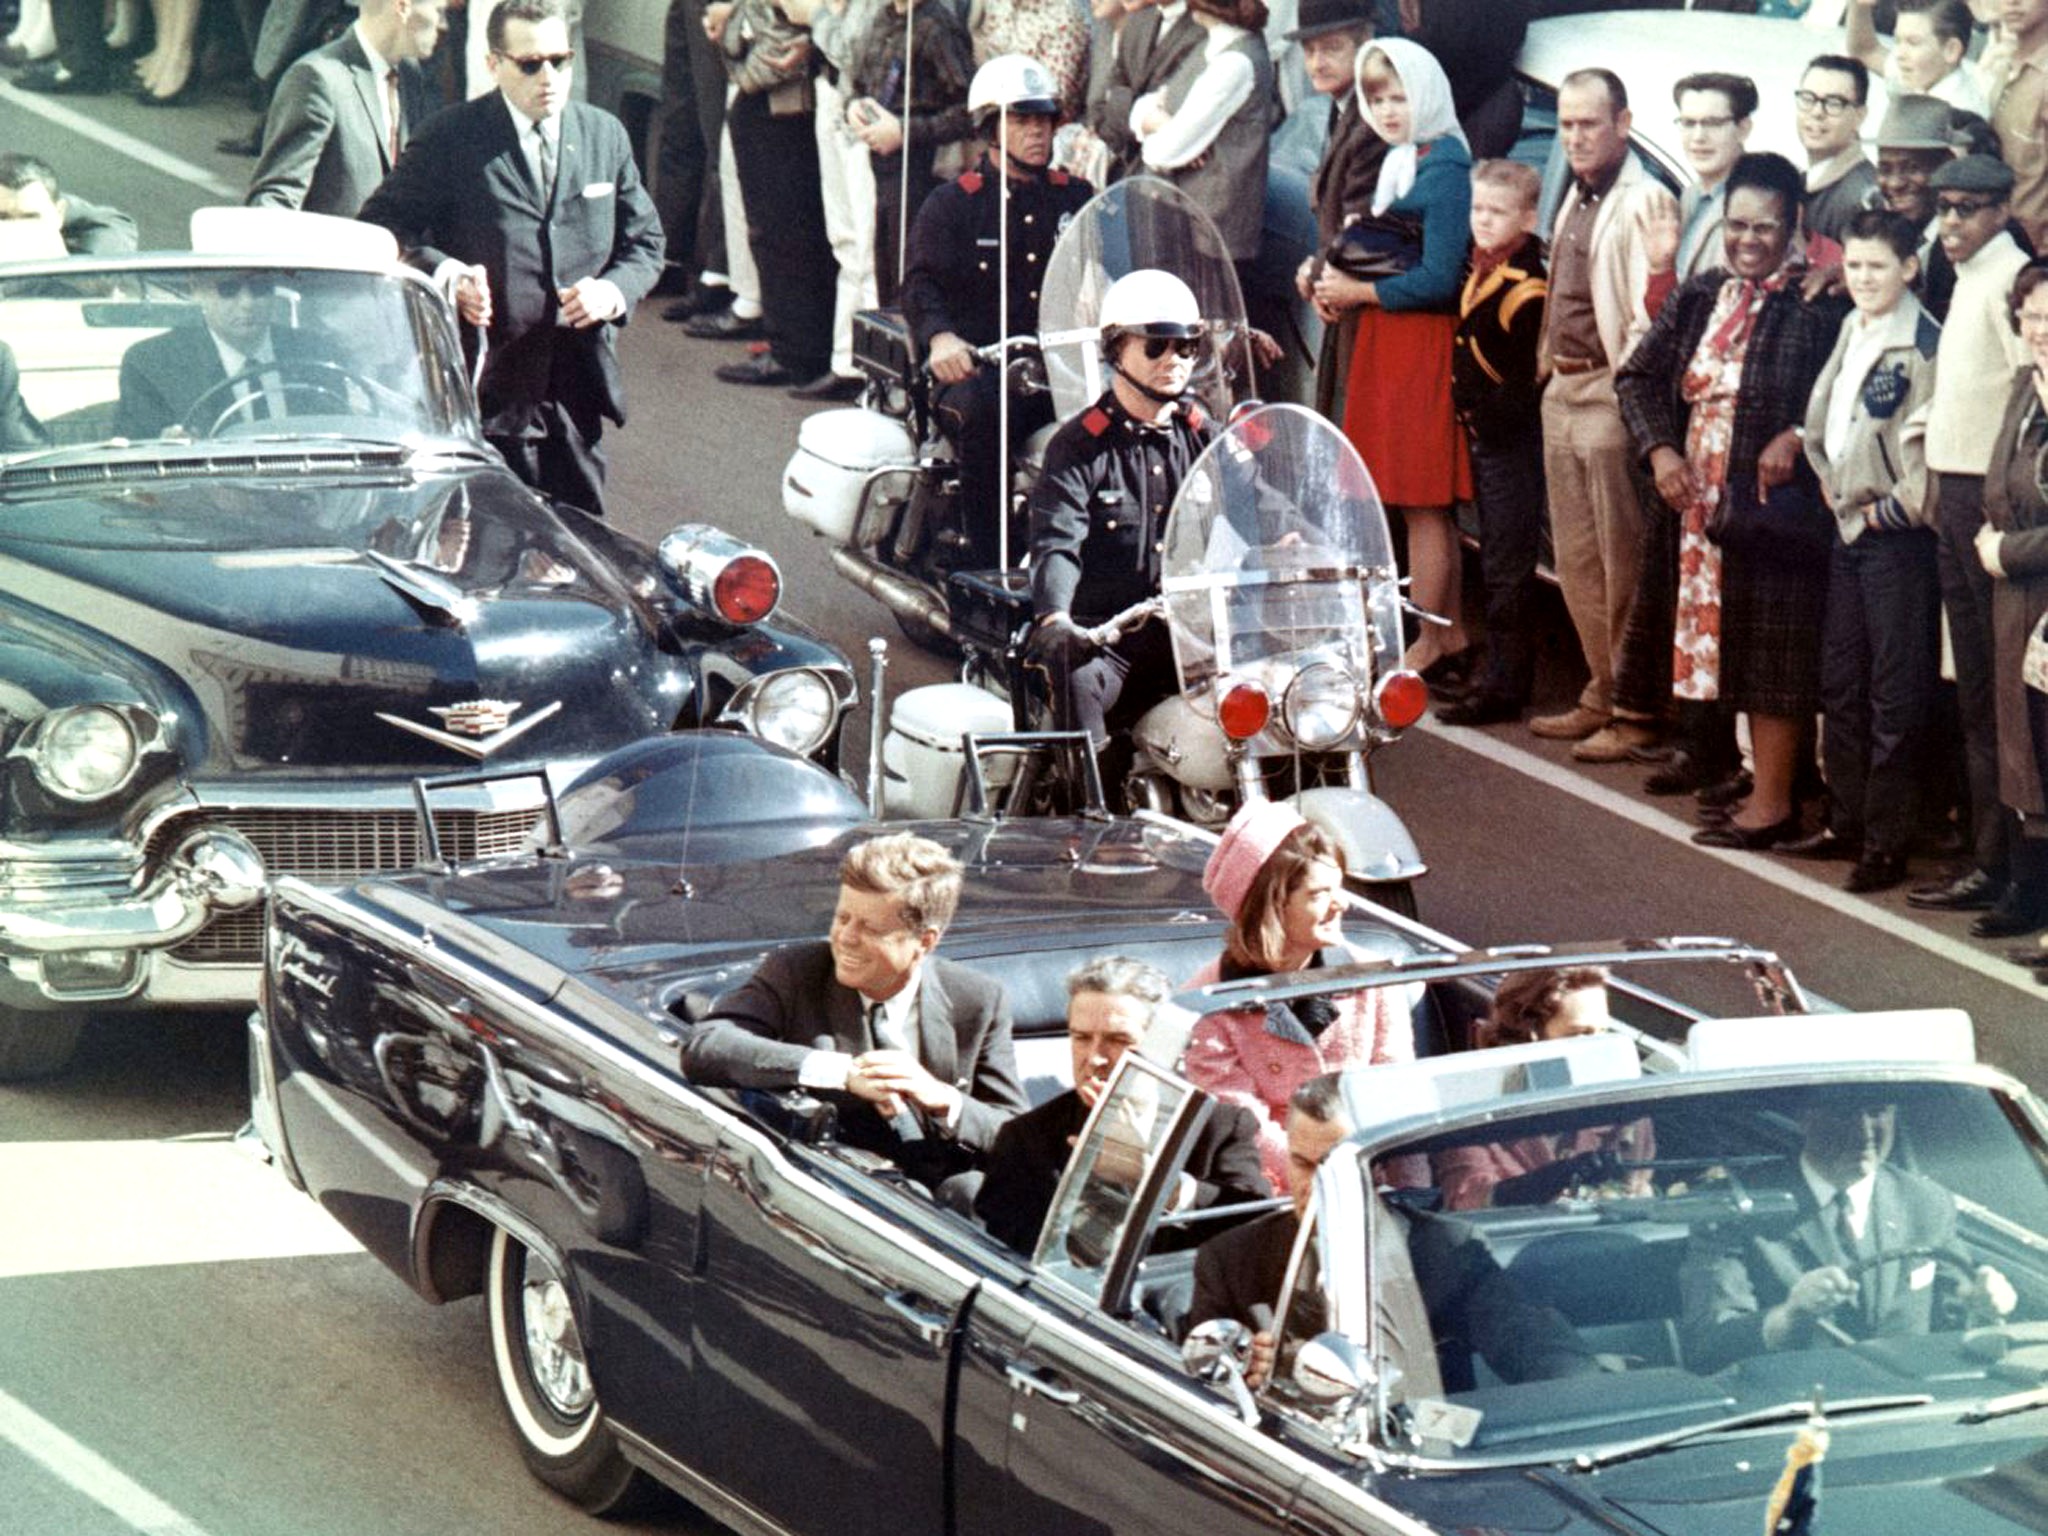 John F. Kennedy on the Day of Assassination